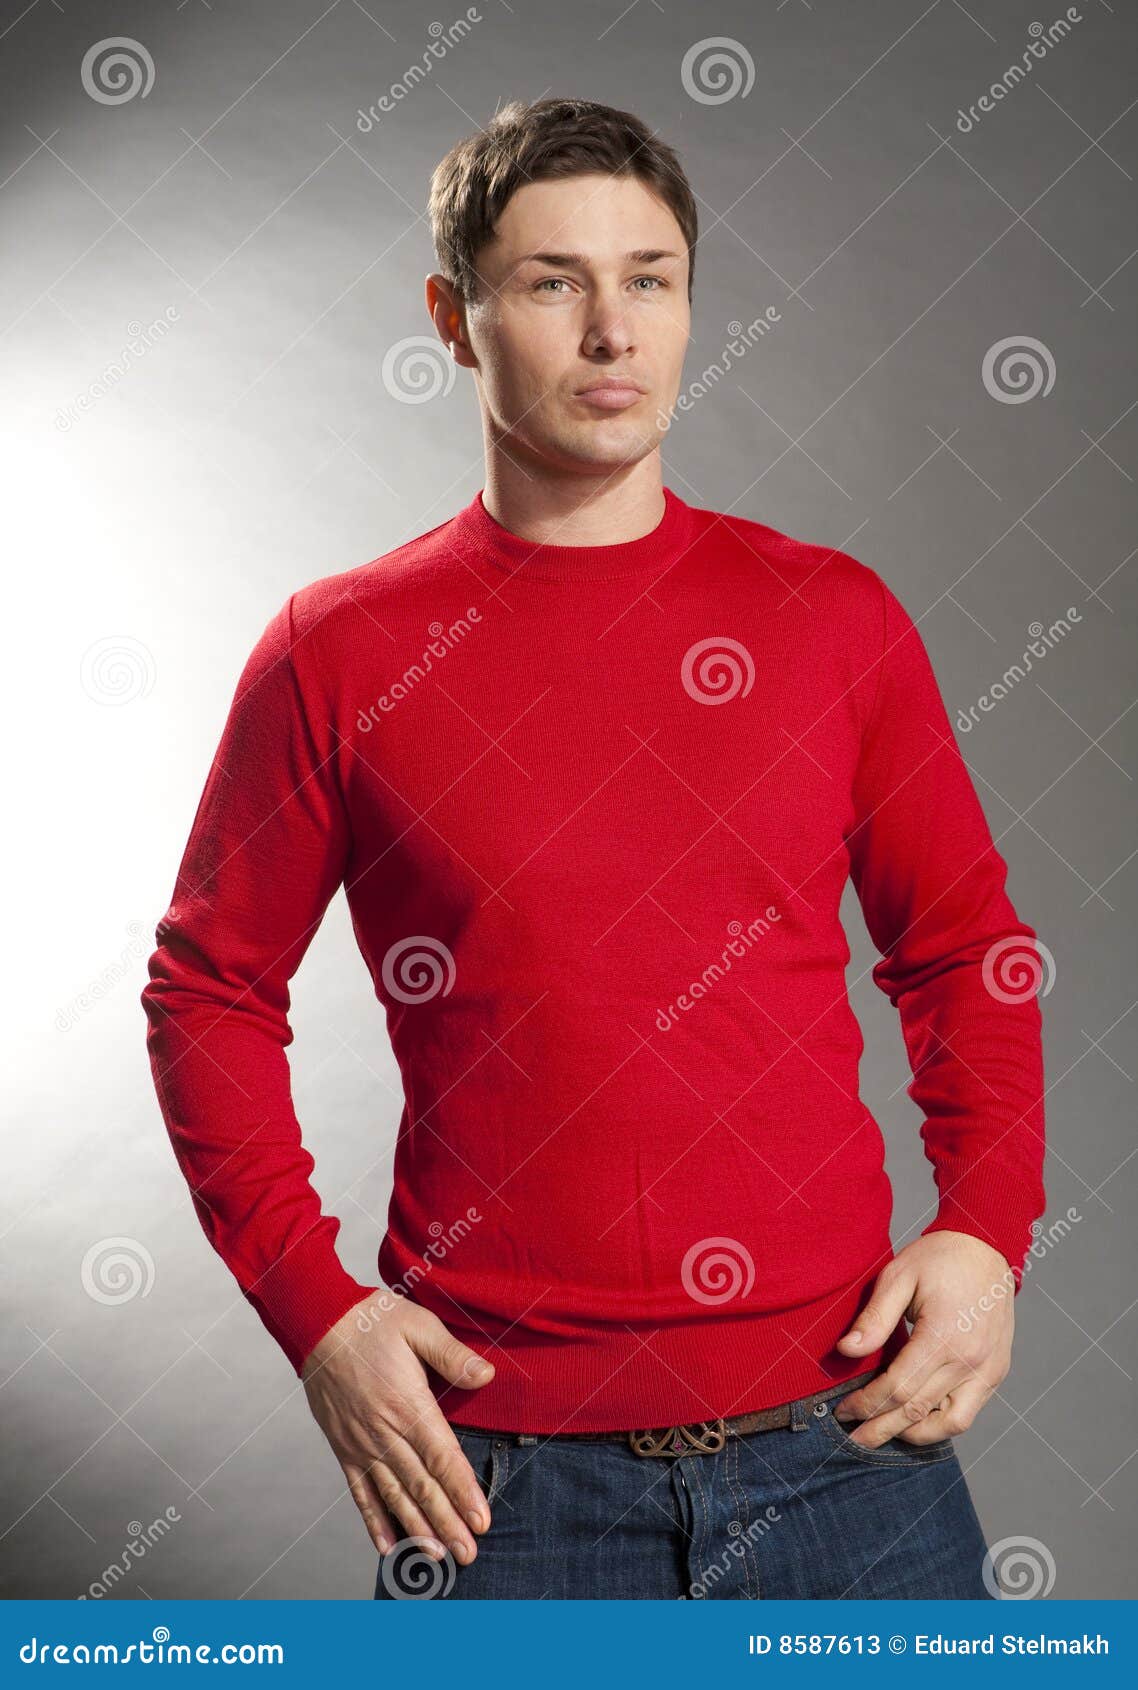 Young Men Dressed in Red Sweater Stock Image - Image of elegance ...